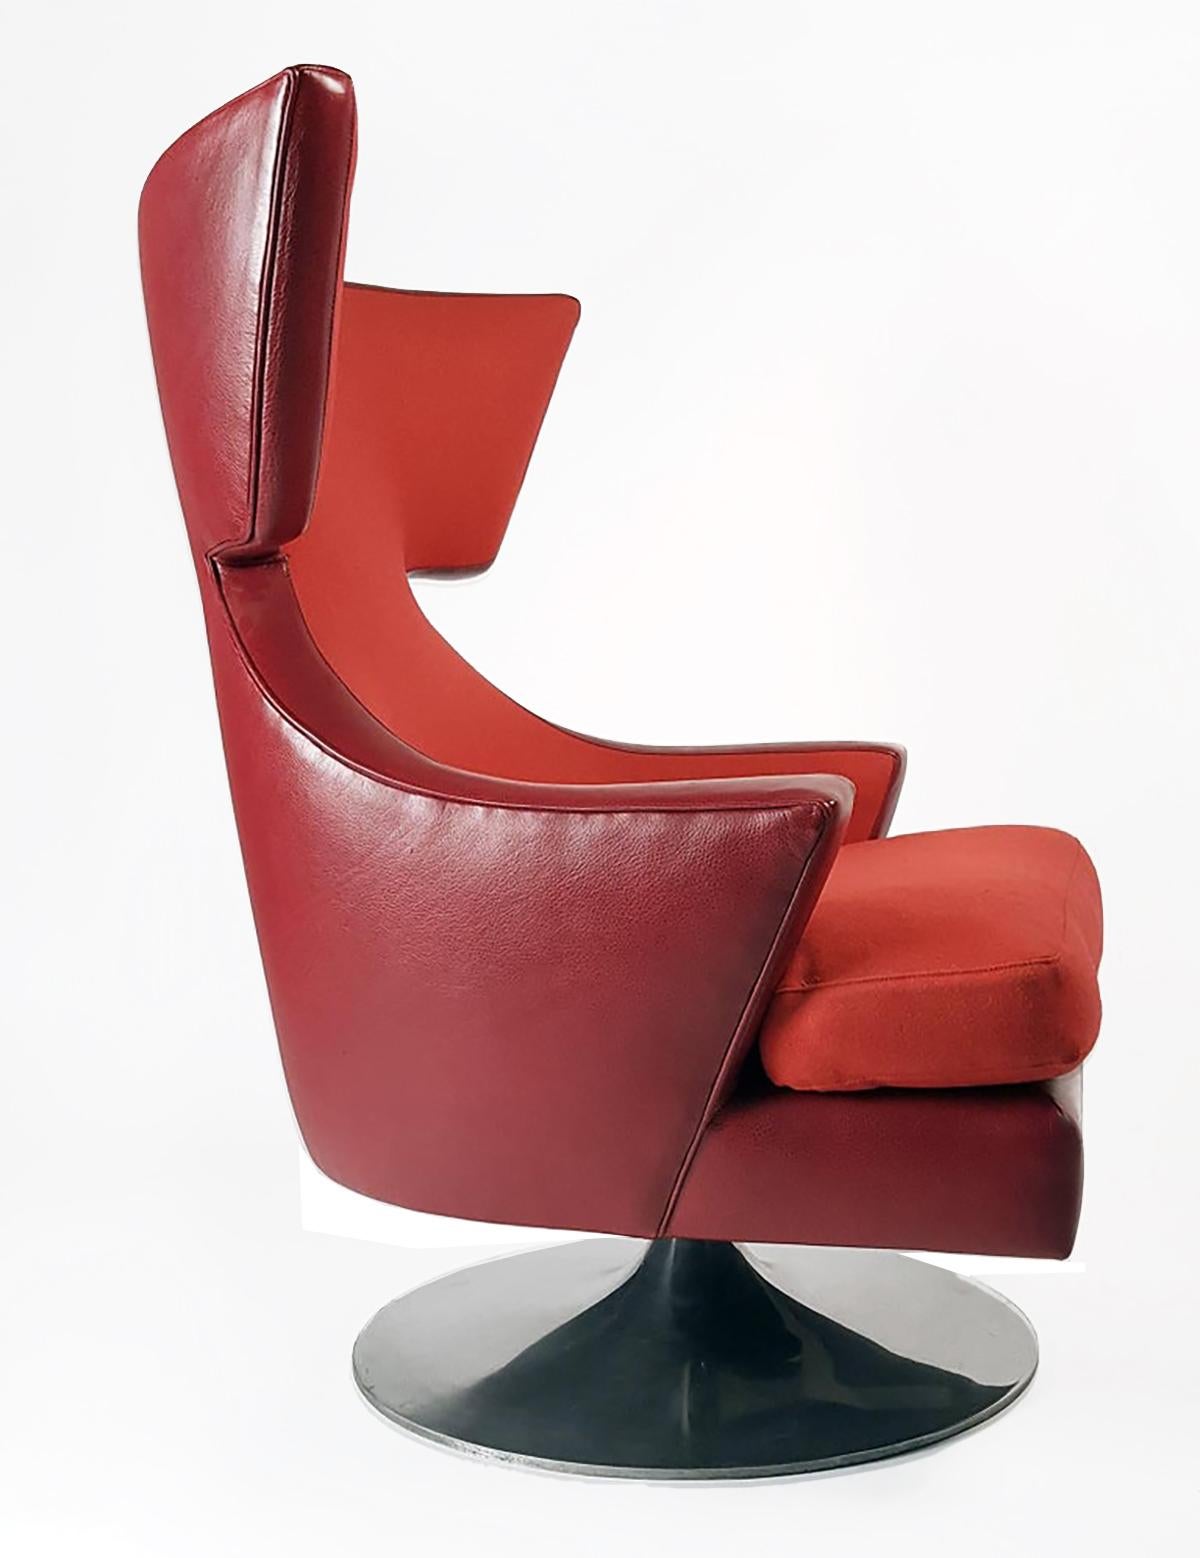 Contemporary Knoll Leather Wing Back Swivel Lounge Chair Designed by Joe D'urso